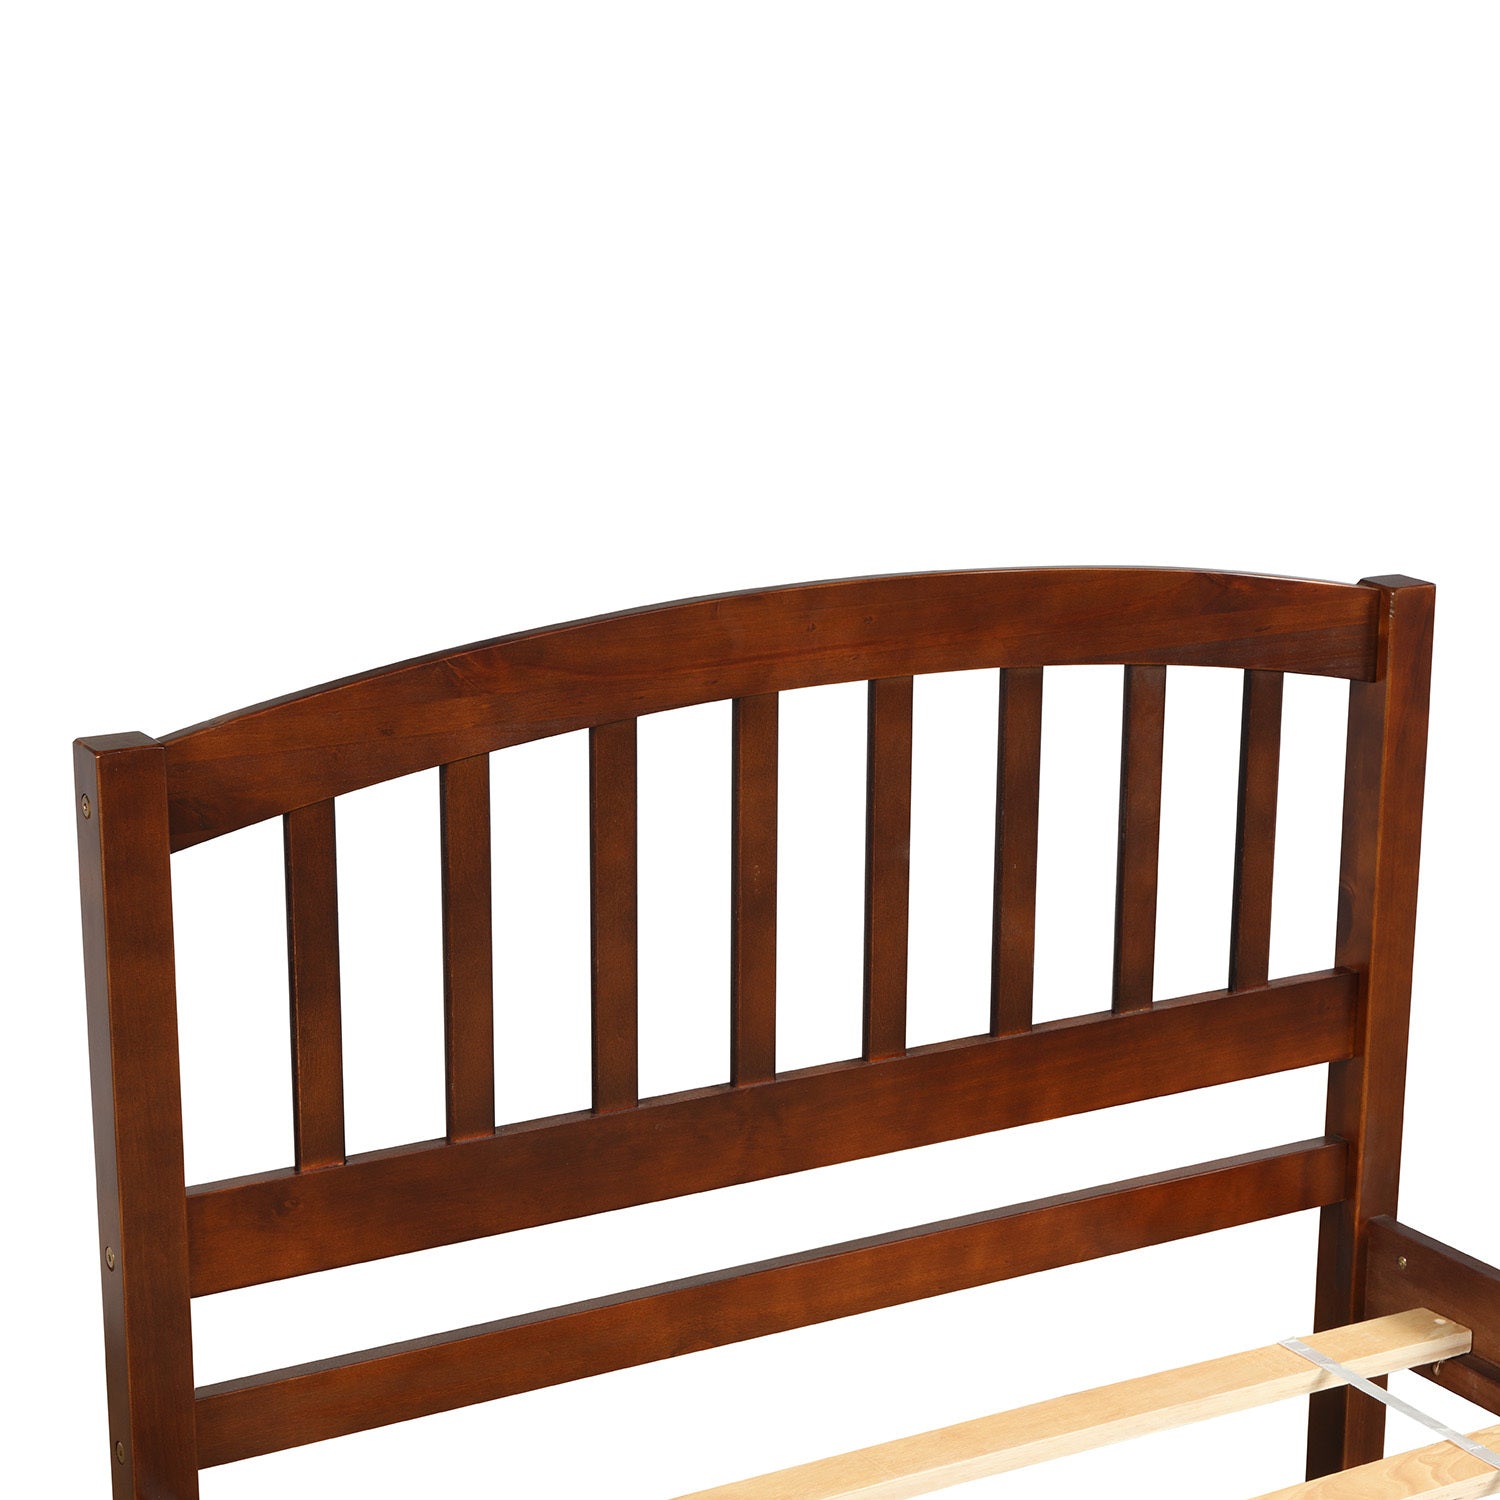 Twin size Platform Bed Wood Bed Frame with Trundle, Walnut